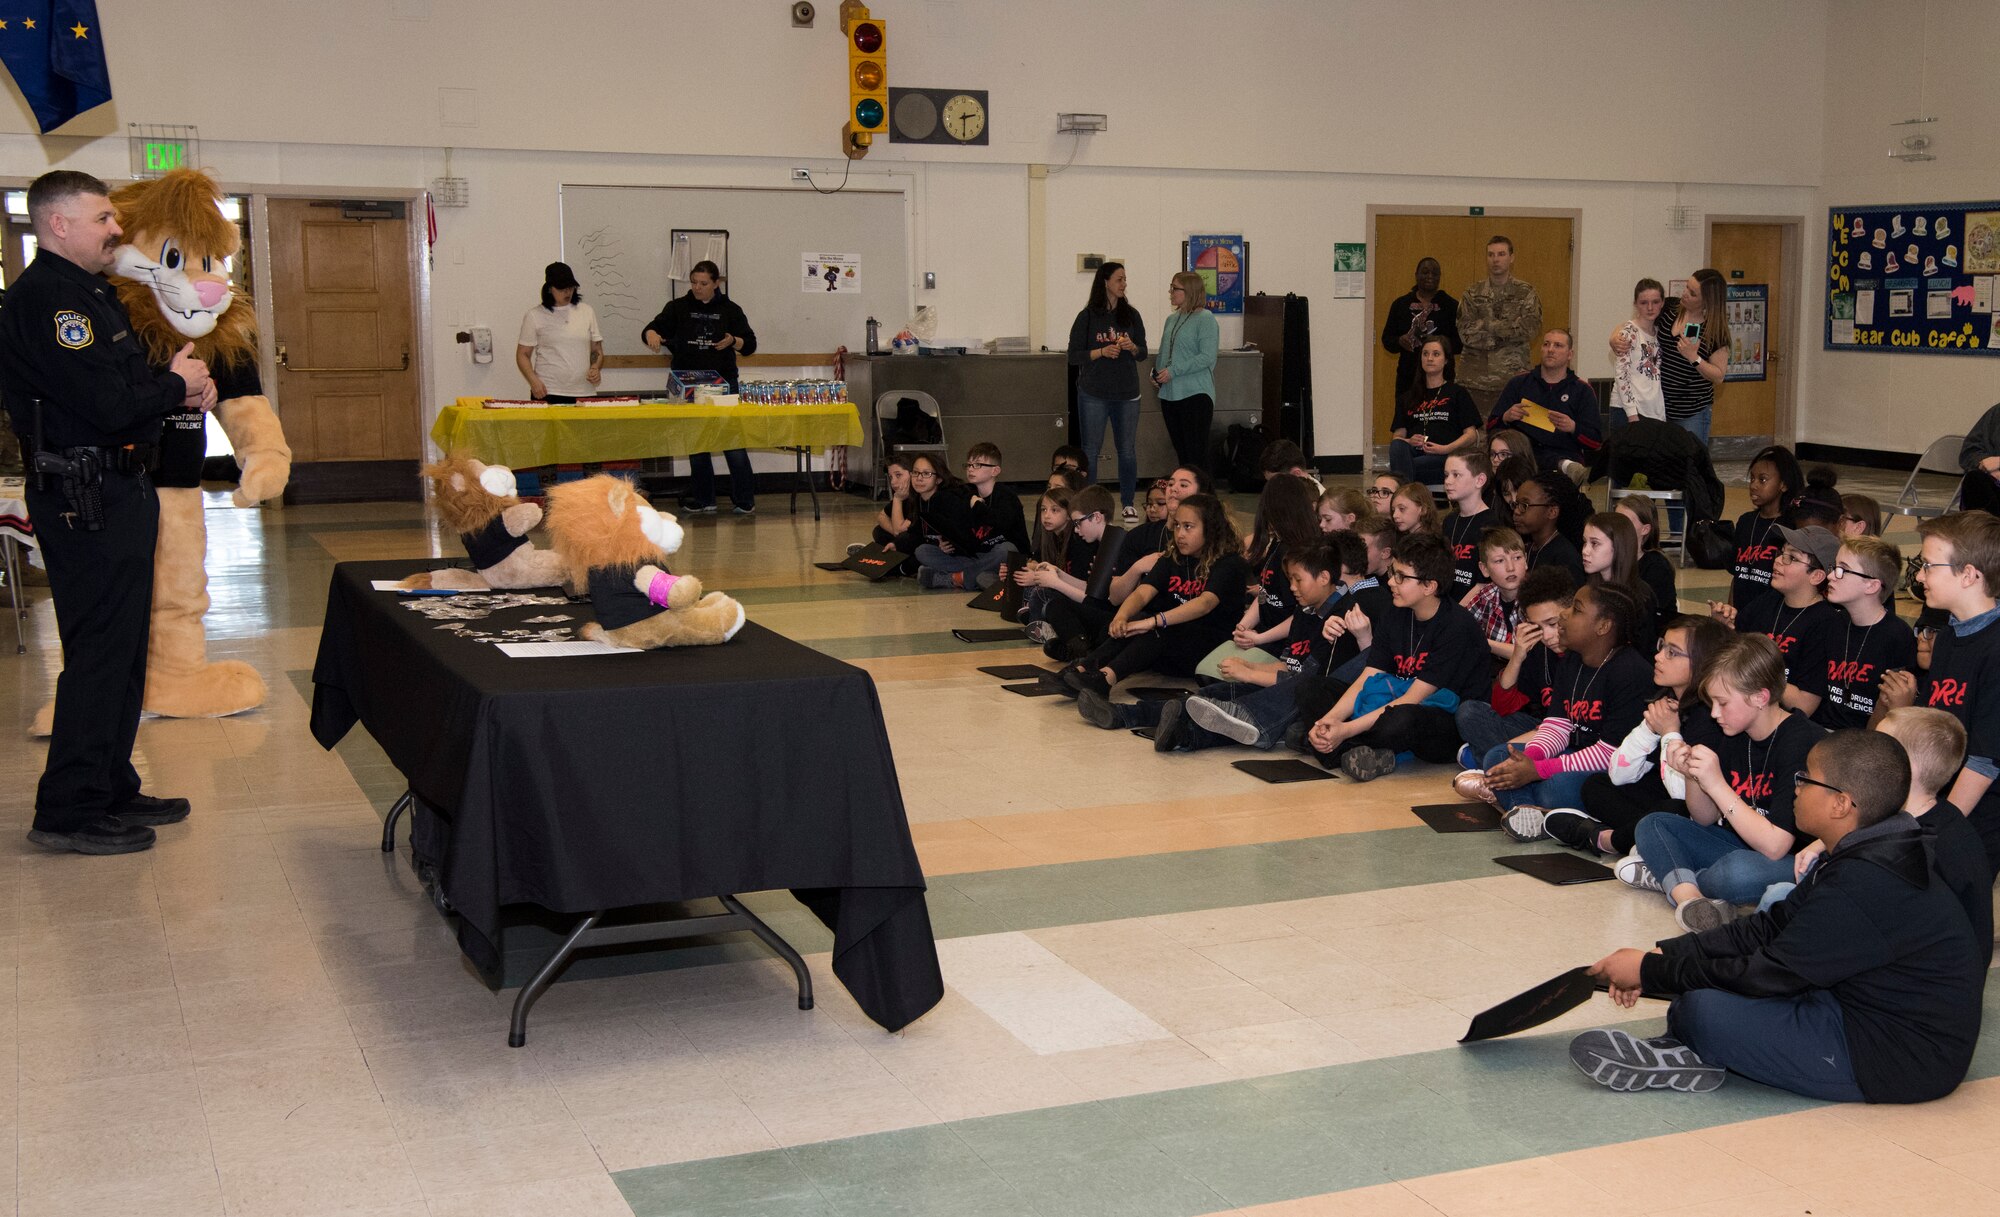 Michael J. Crerend, lead police officer with the 673d Security Forces Squadron and Drug Abuse Resistance Education officer, speaks with students from the D.A.R.E. program at Ursa Major Elementary School at Joint Base Elmendorf-Richardson, Alaska, May 2, 2018. D.A.R.E. is a program designed to provide students with the knowledge and tools they need to resist drugs, alcohol and other high-risk behaviors.